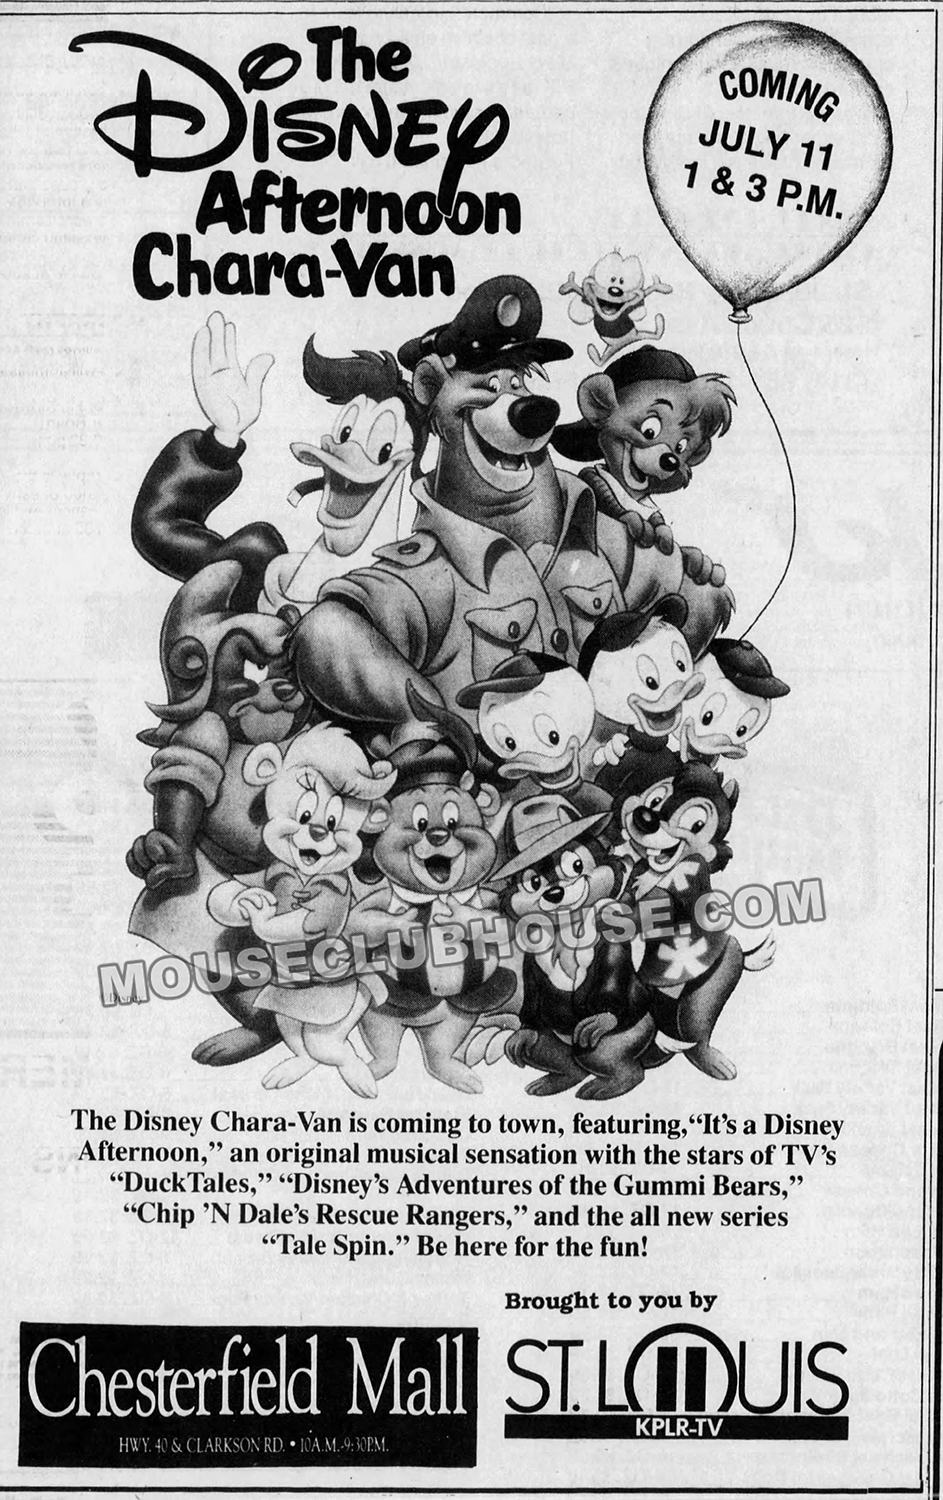 A newspaper ad announcing the traveling Disney Afternoon promotional tour